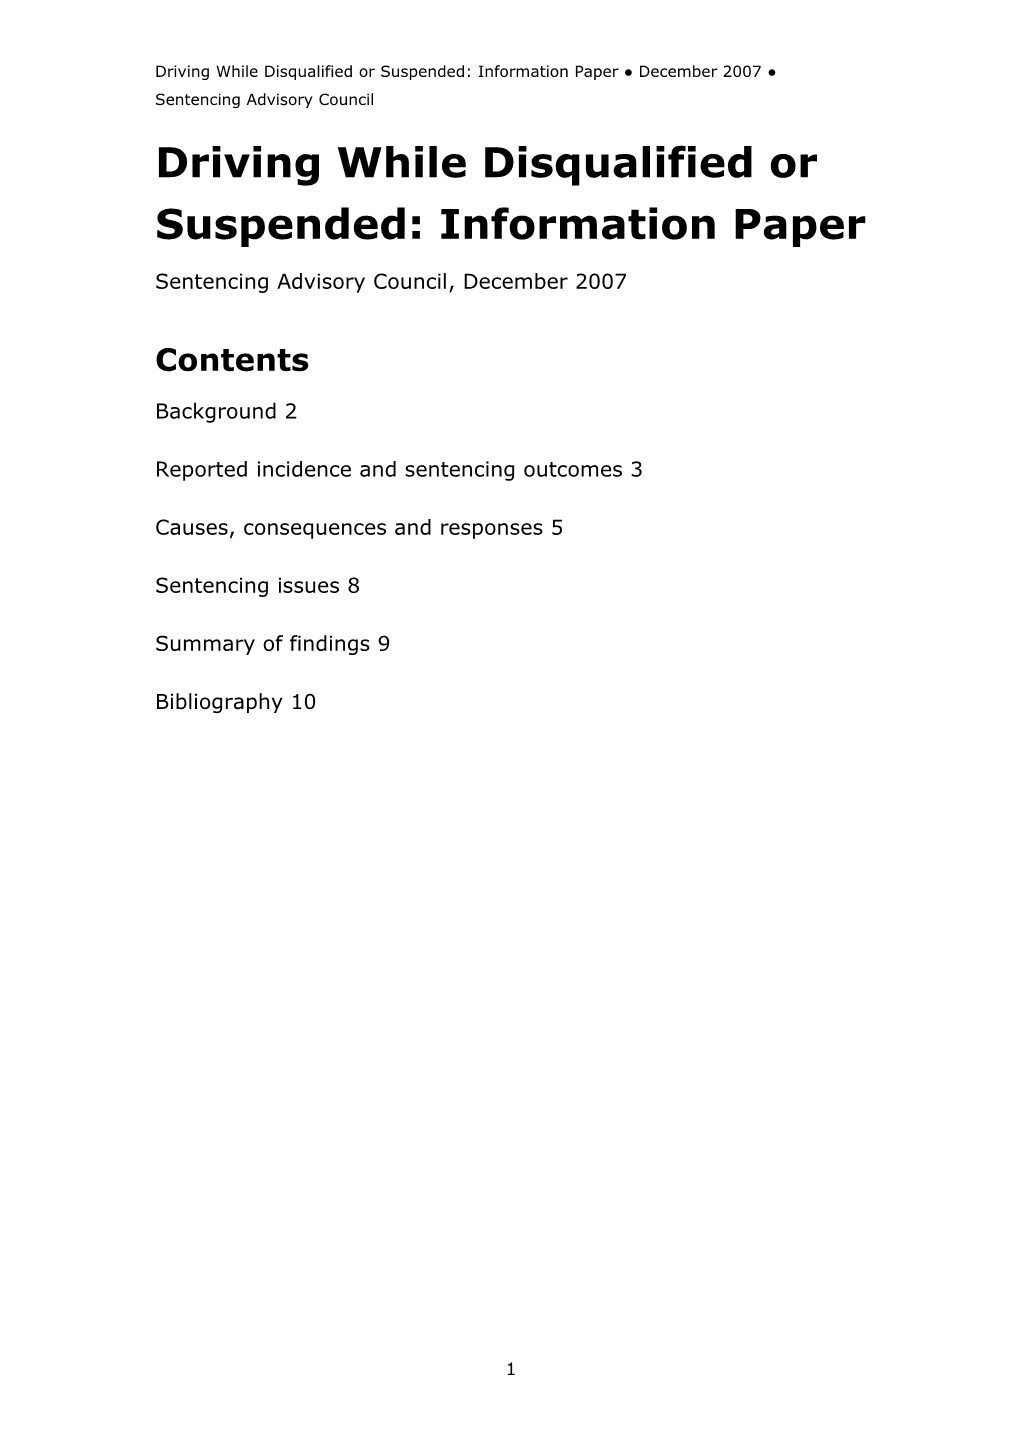 Driving While Disqualified Or Suspended: Information Paper